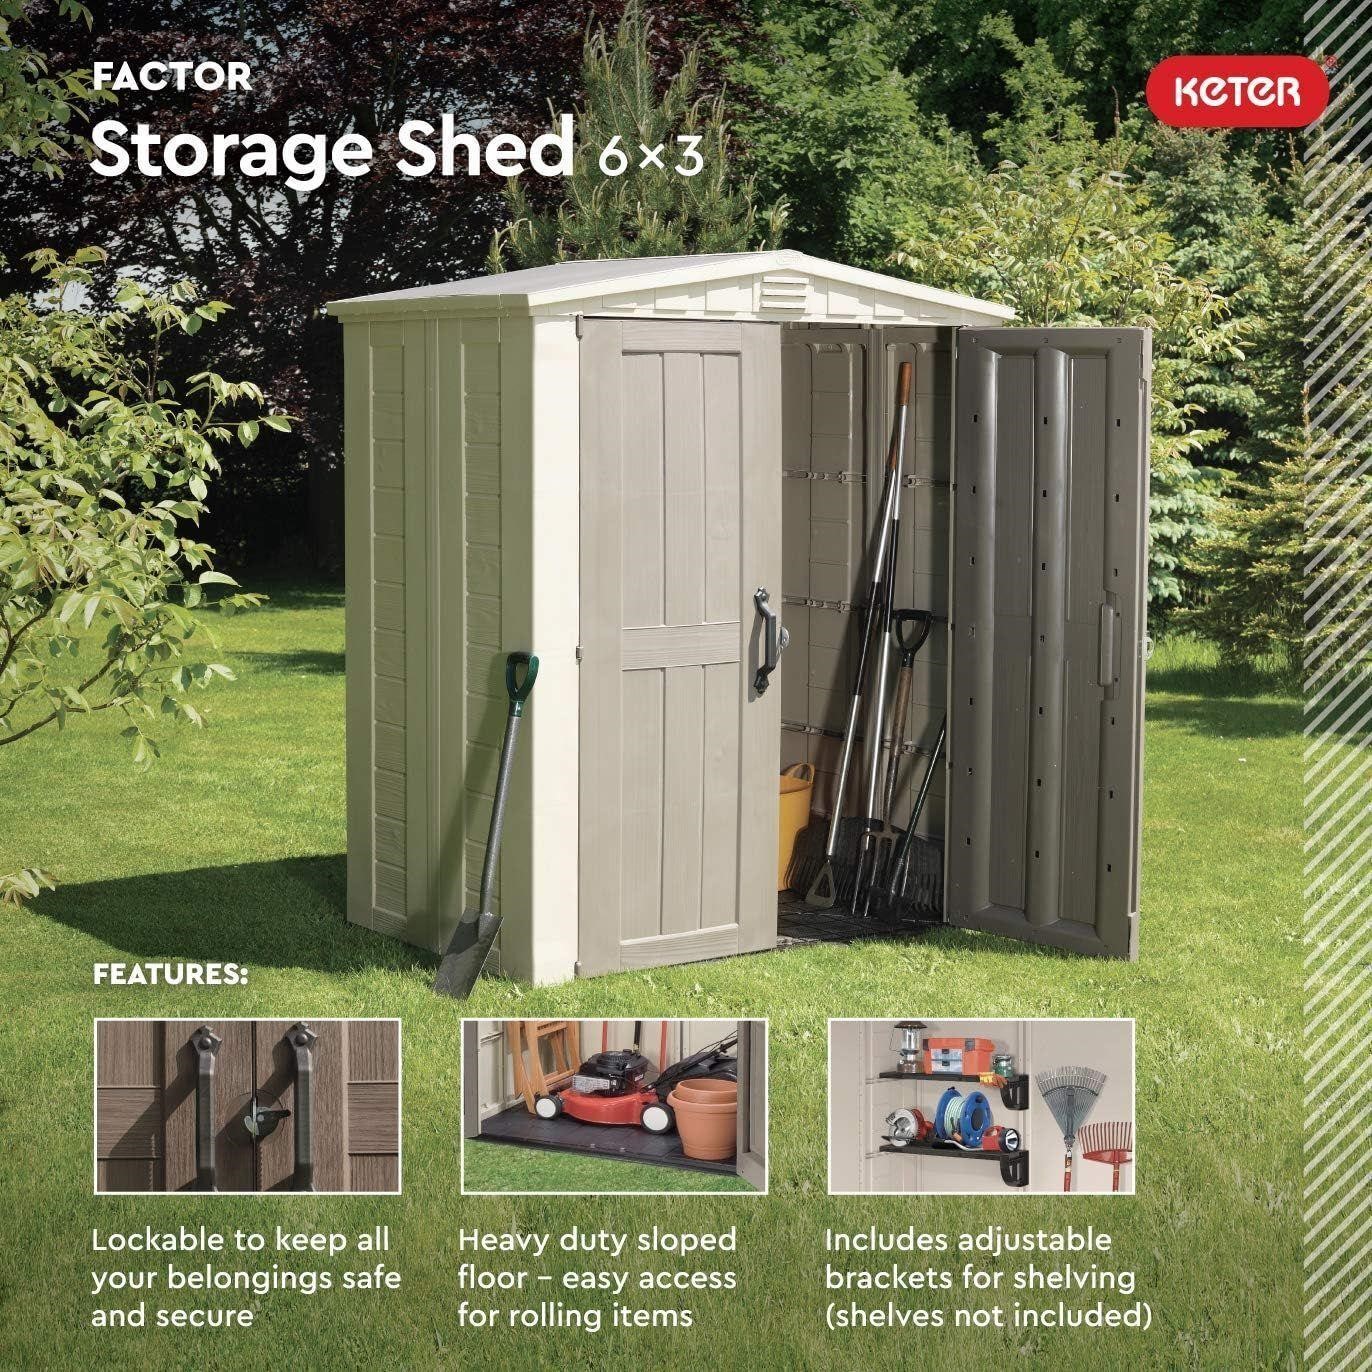 Keter 3-ft x 6-ft Factor Gable Storage Shed